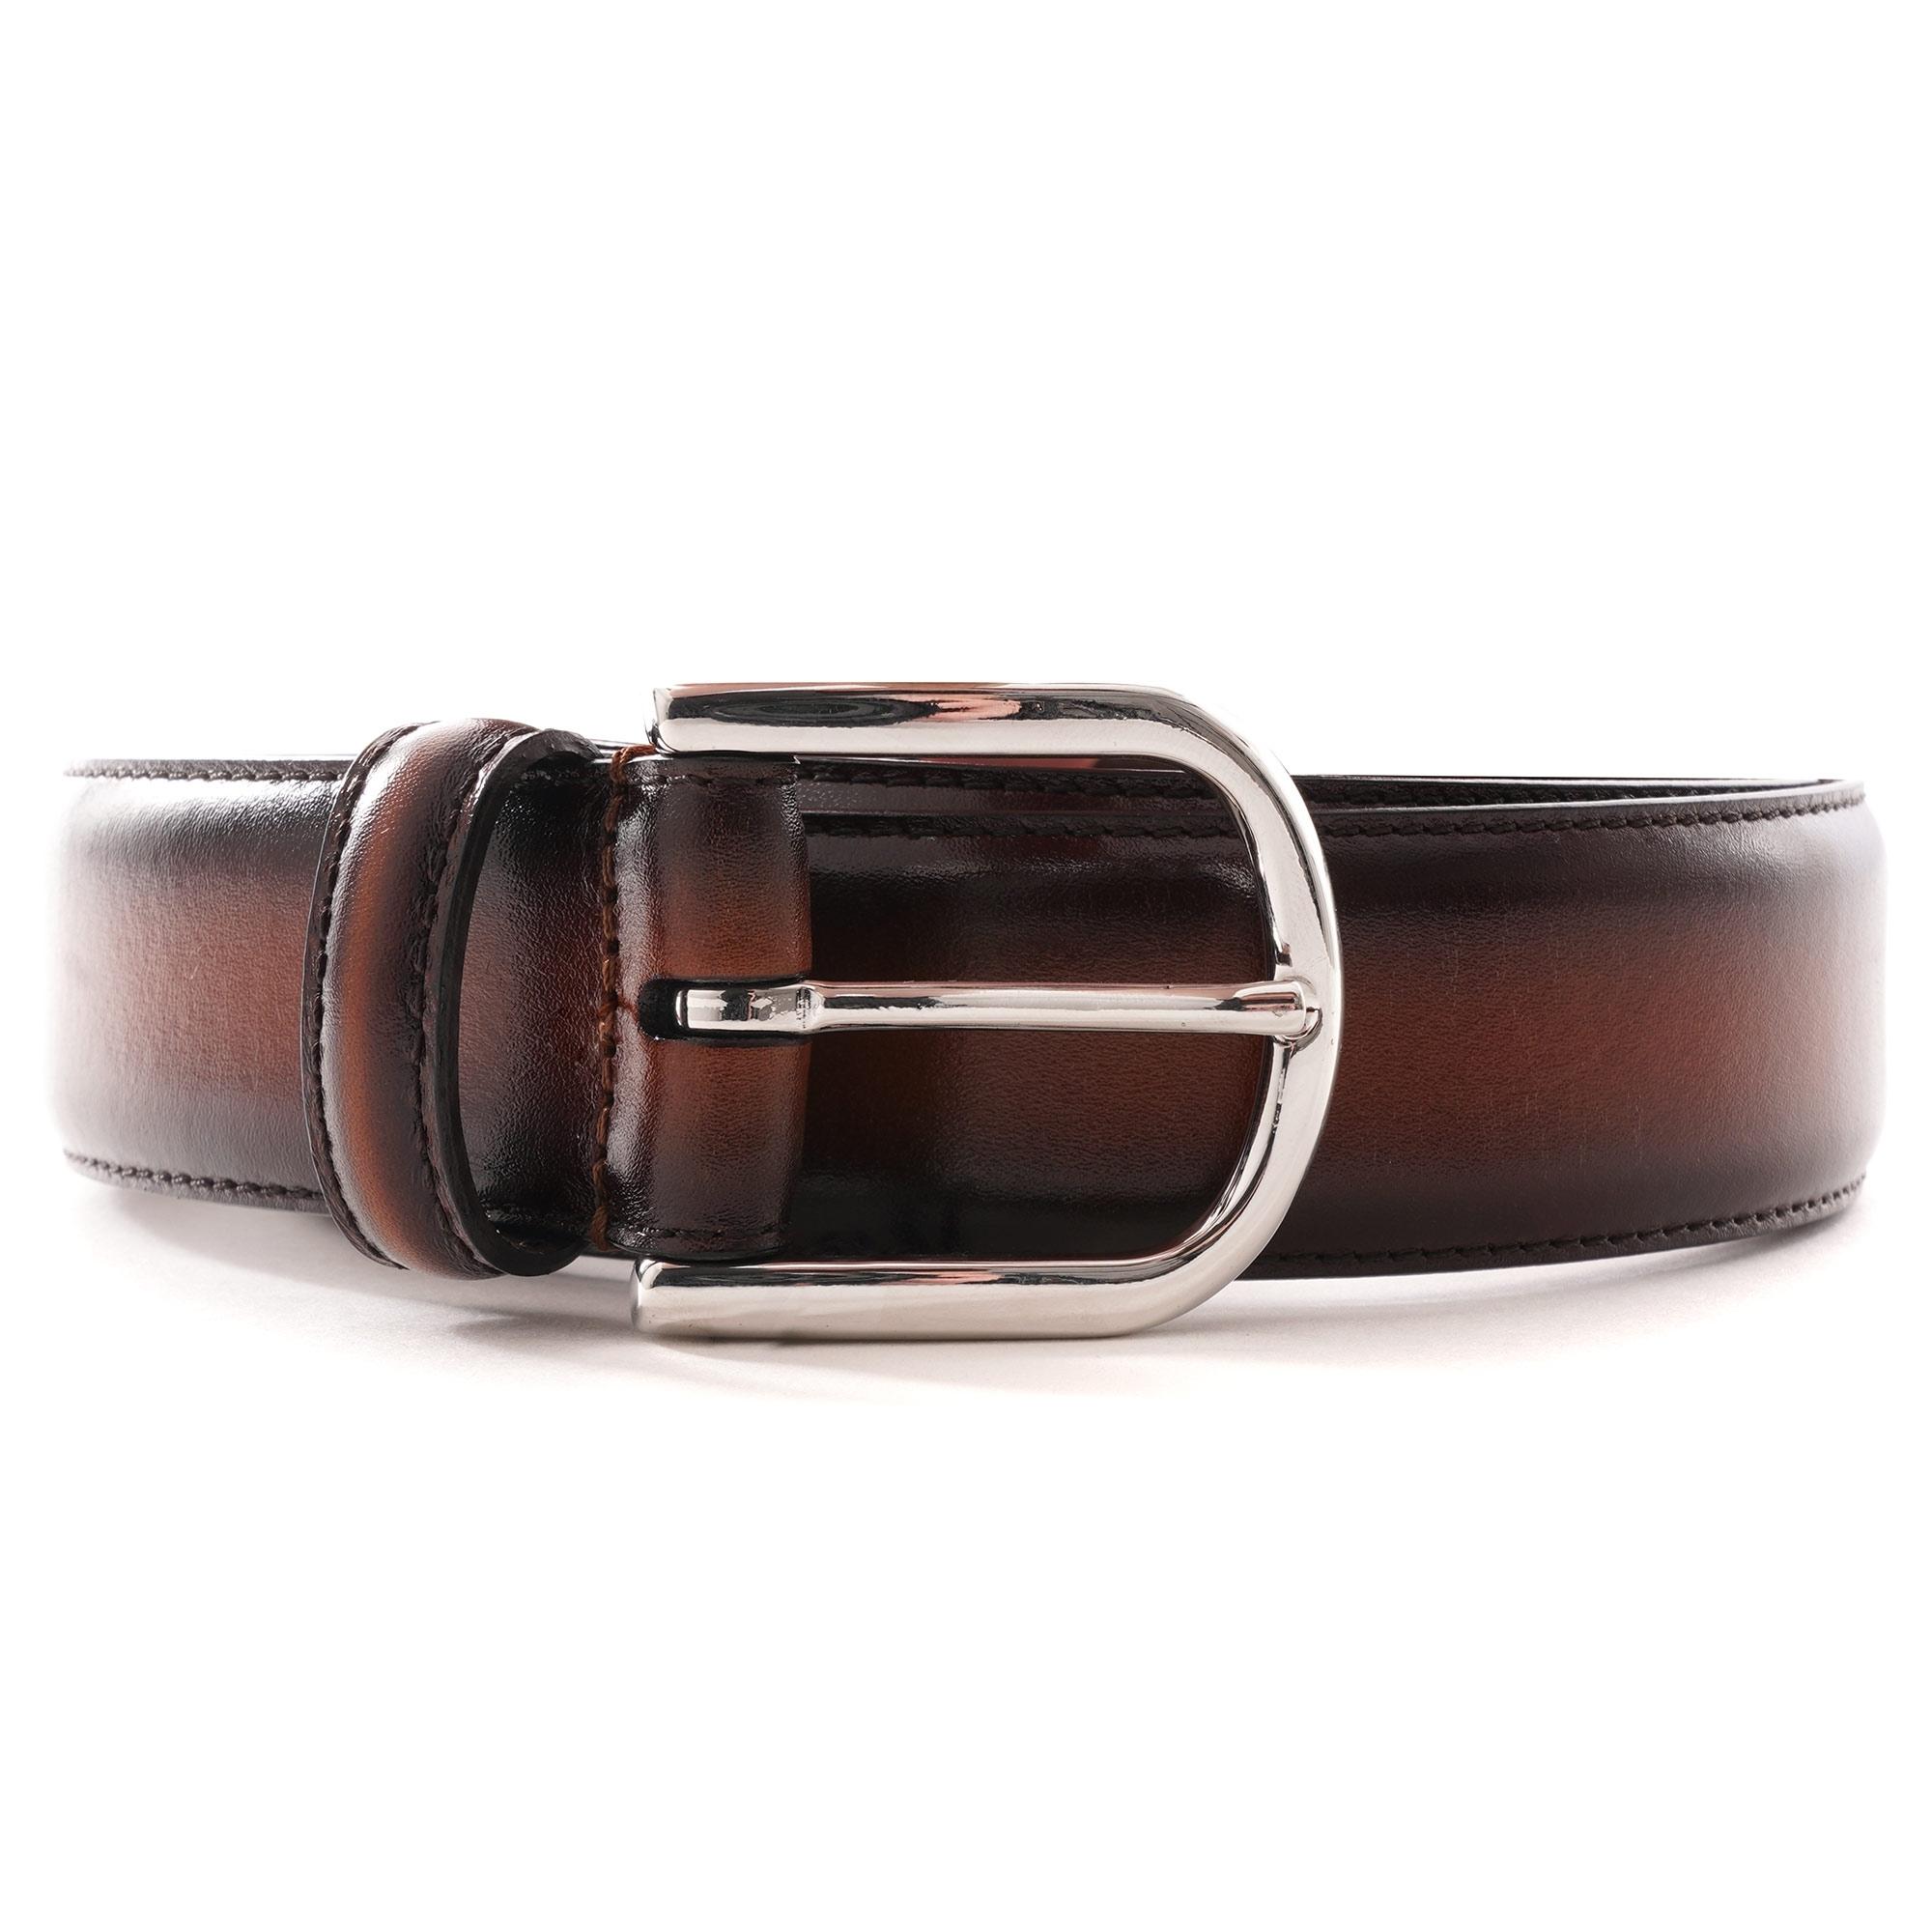 Anderson's Polished Leather Belt in Brown for Men - Lyst